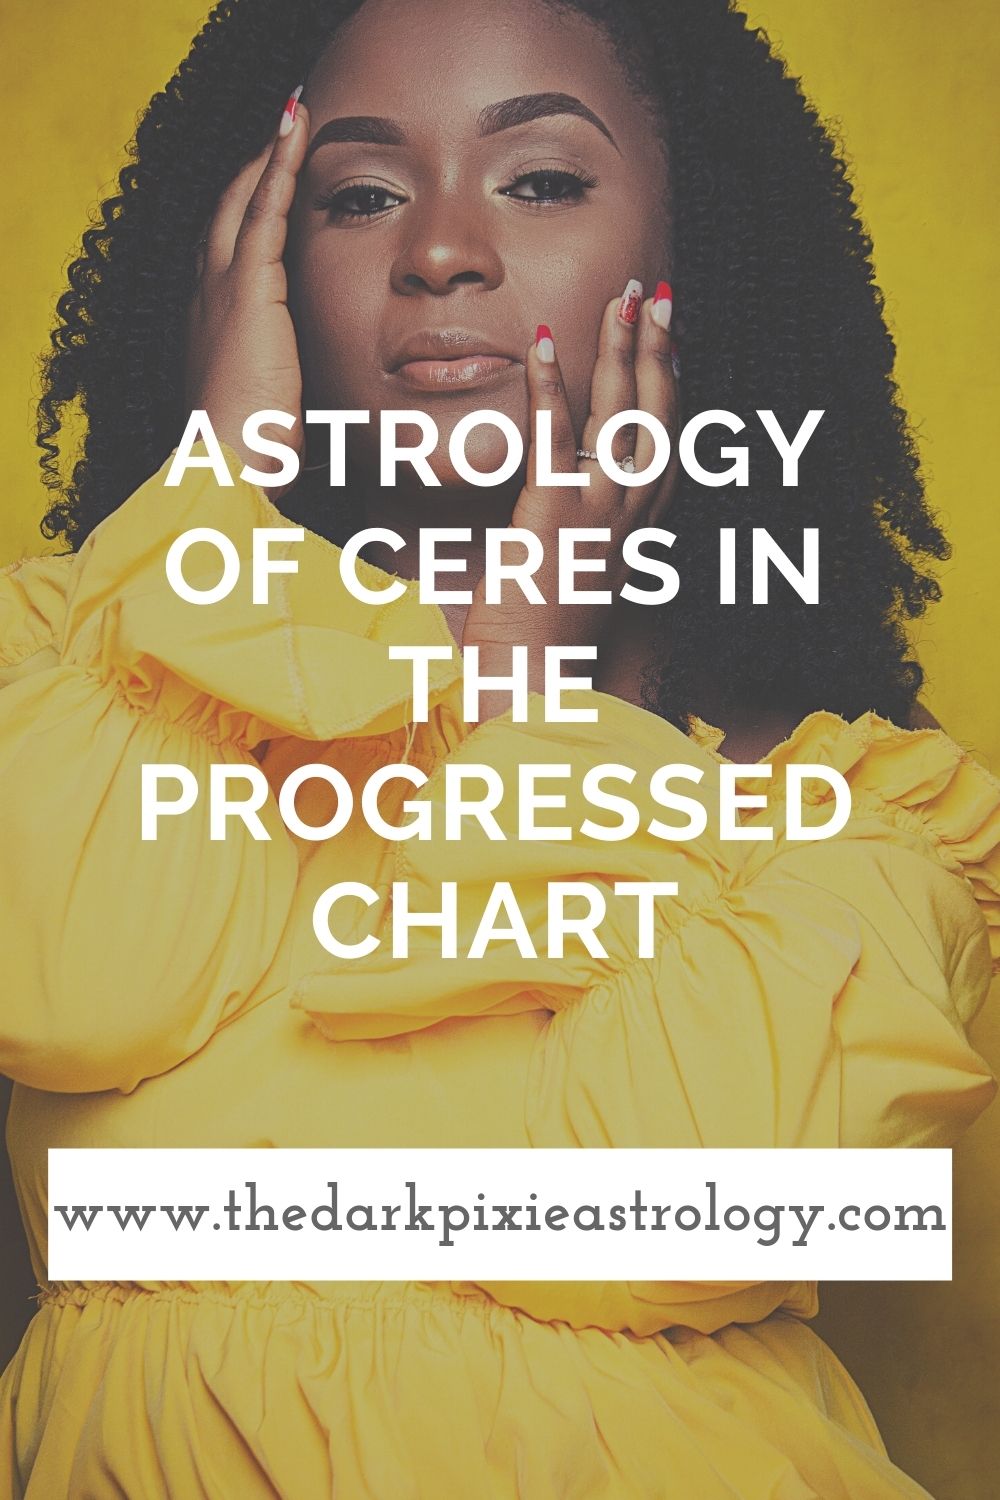 Astrology of Ceres in the Progressed Chart - The Dark Pixie Astrology